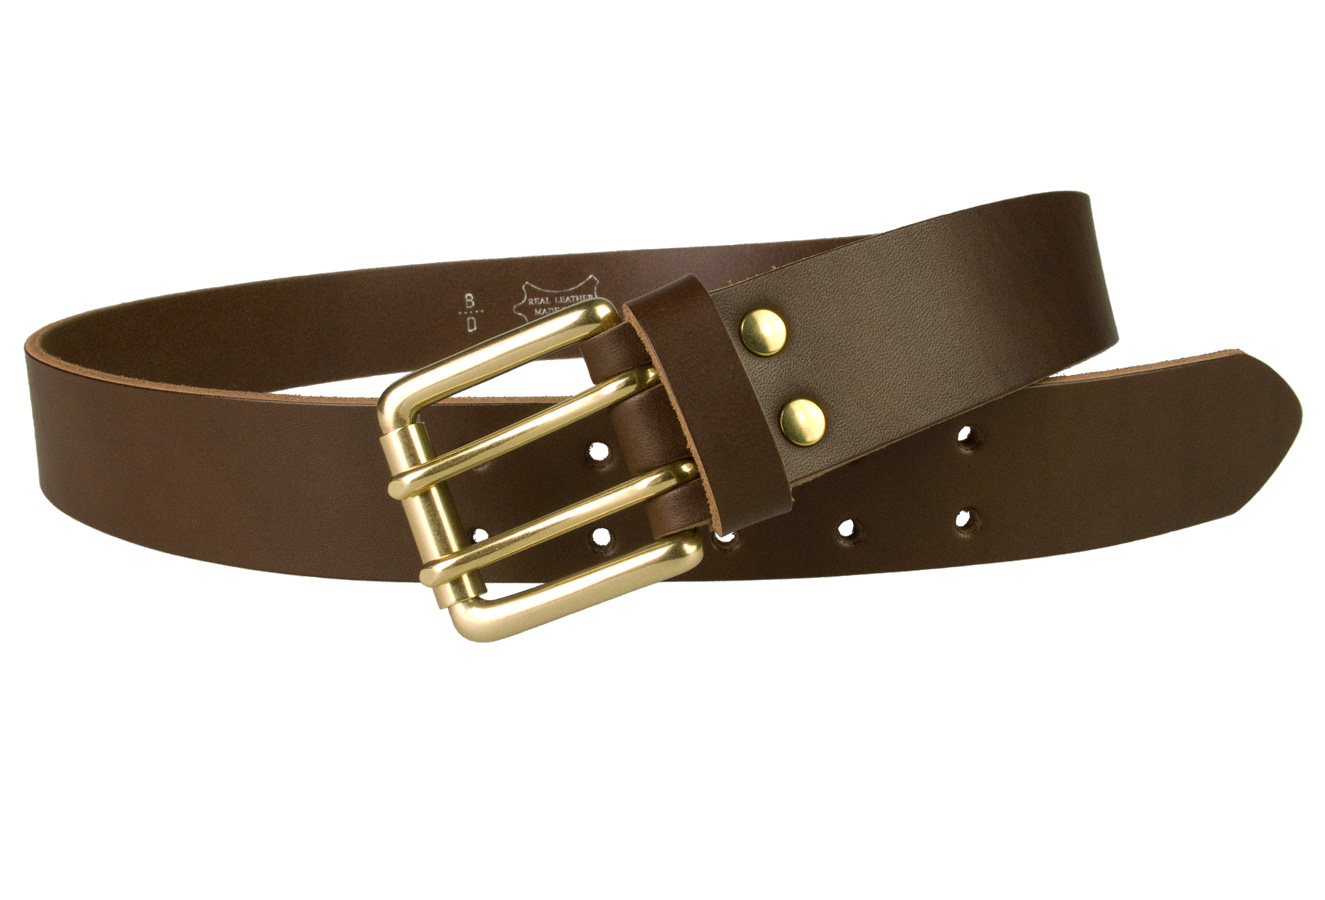 Brass Double Prong Leather Jeans Belt - Brown - Open View 2 - Belt Designs